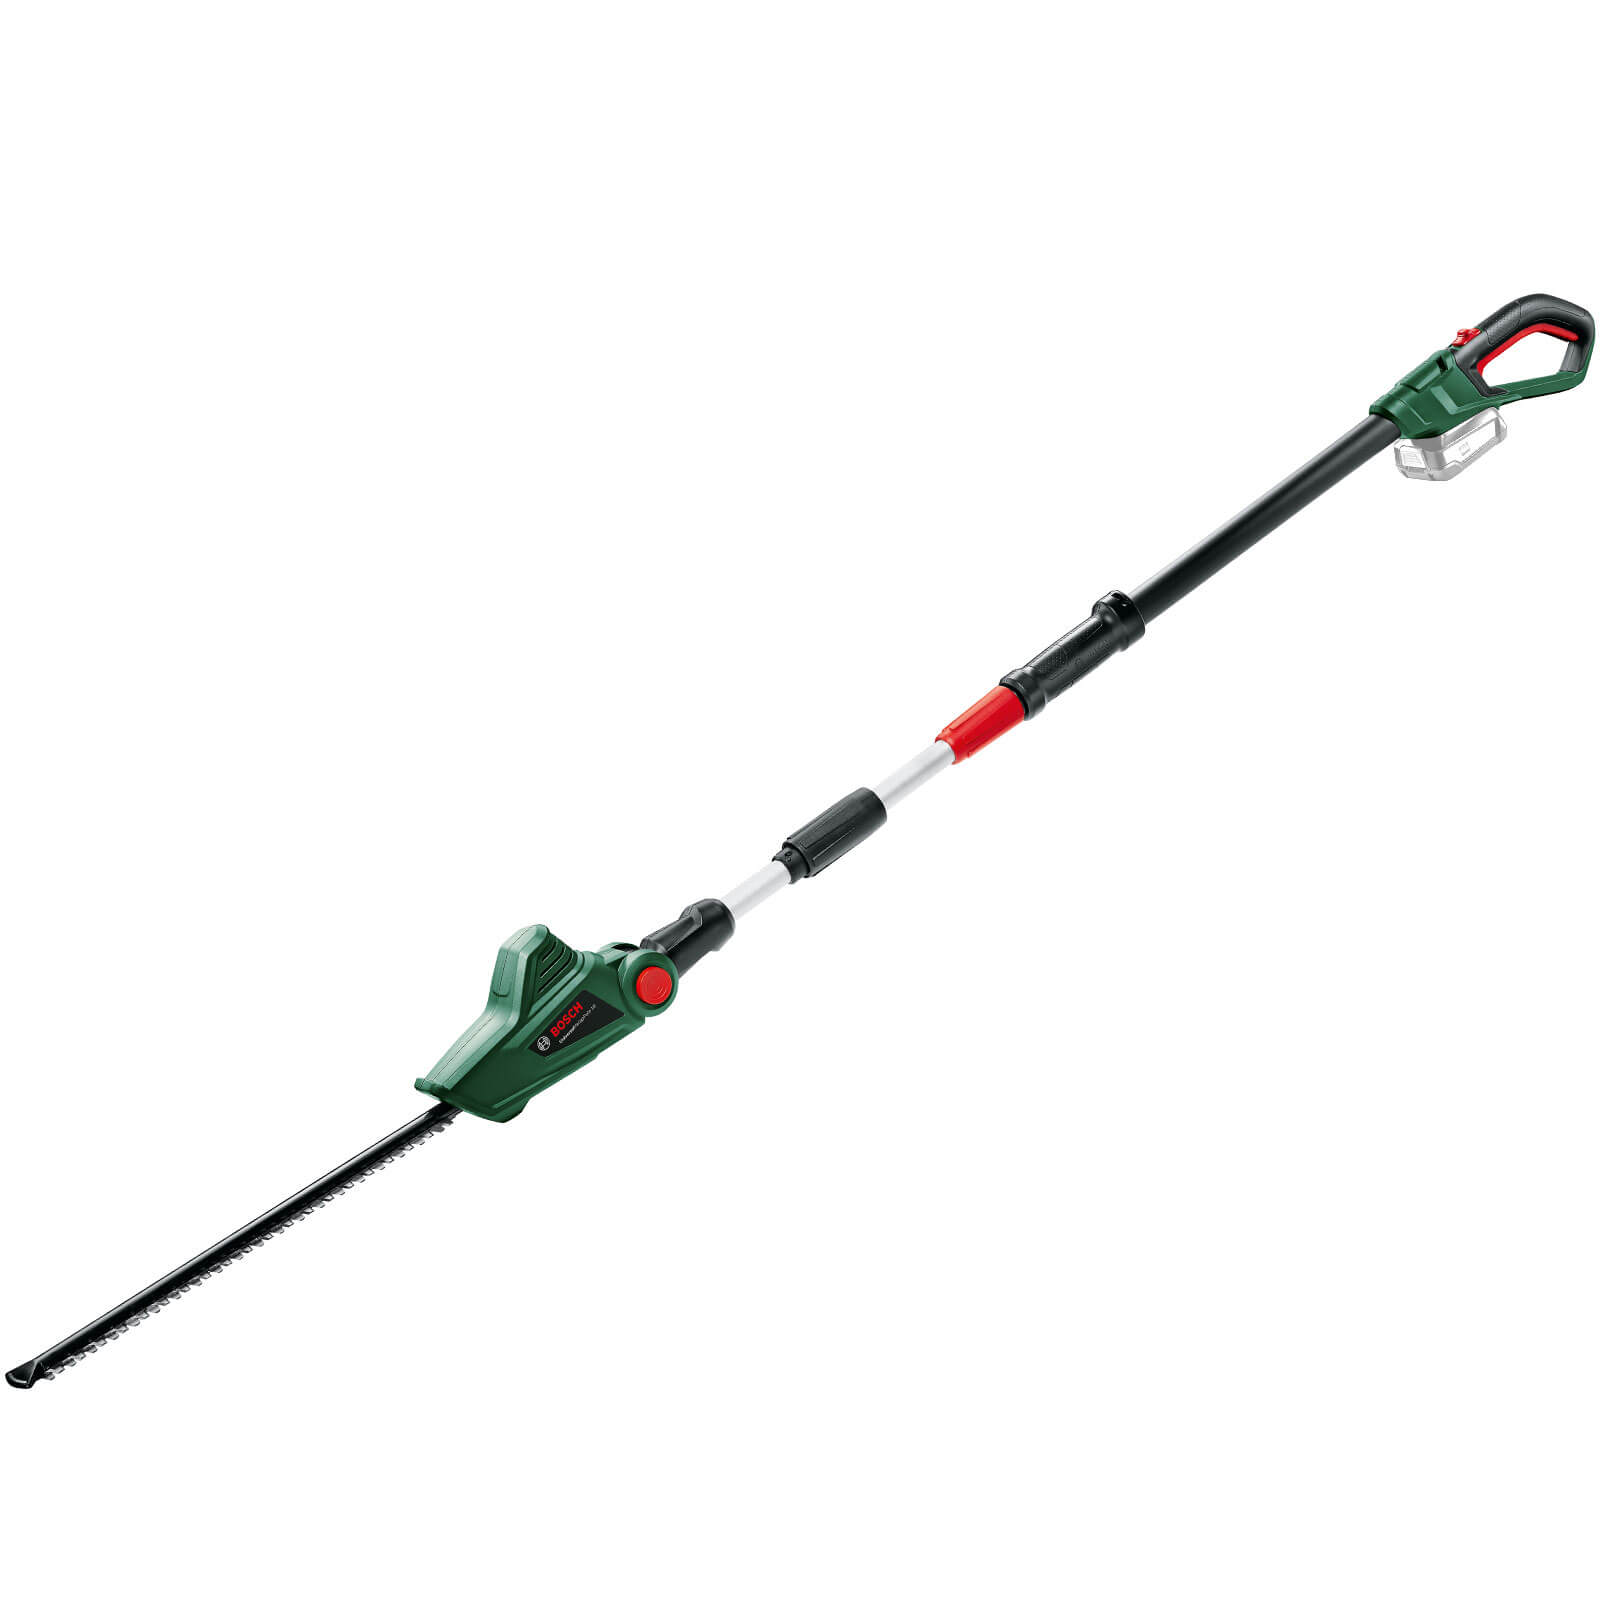 Image of Bosch UNIVERSALHEDGEPOLE 18v Cordless Telescopic Pole Hedge Trimmer 430mm No Batteries No Charger